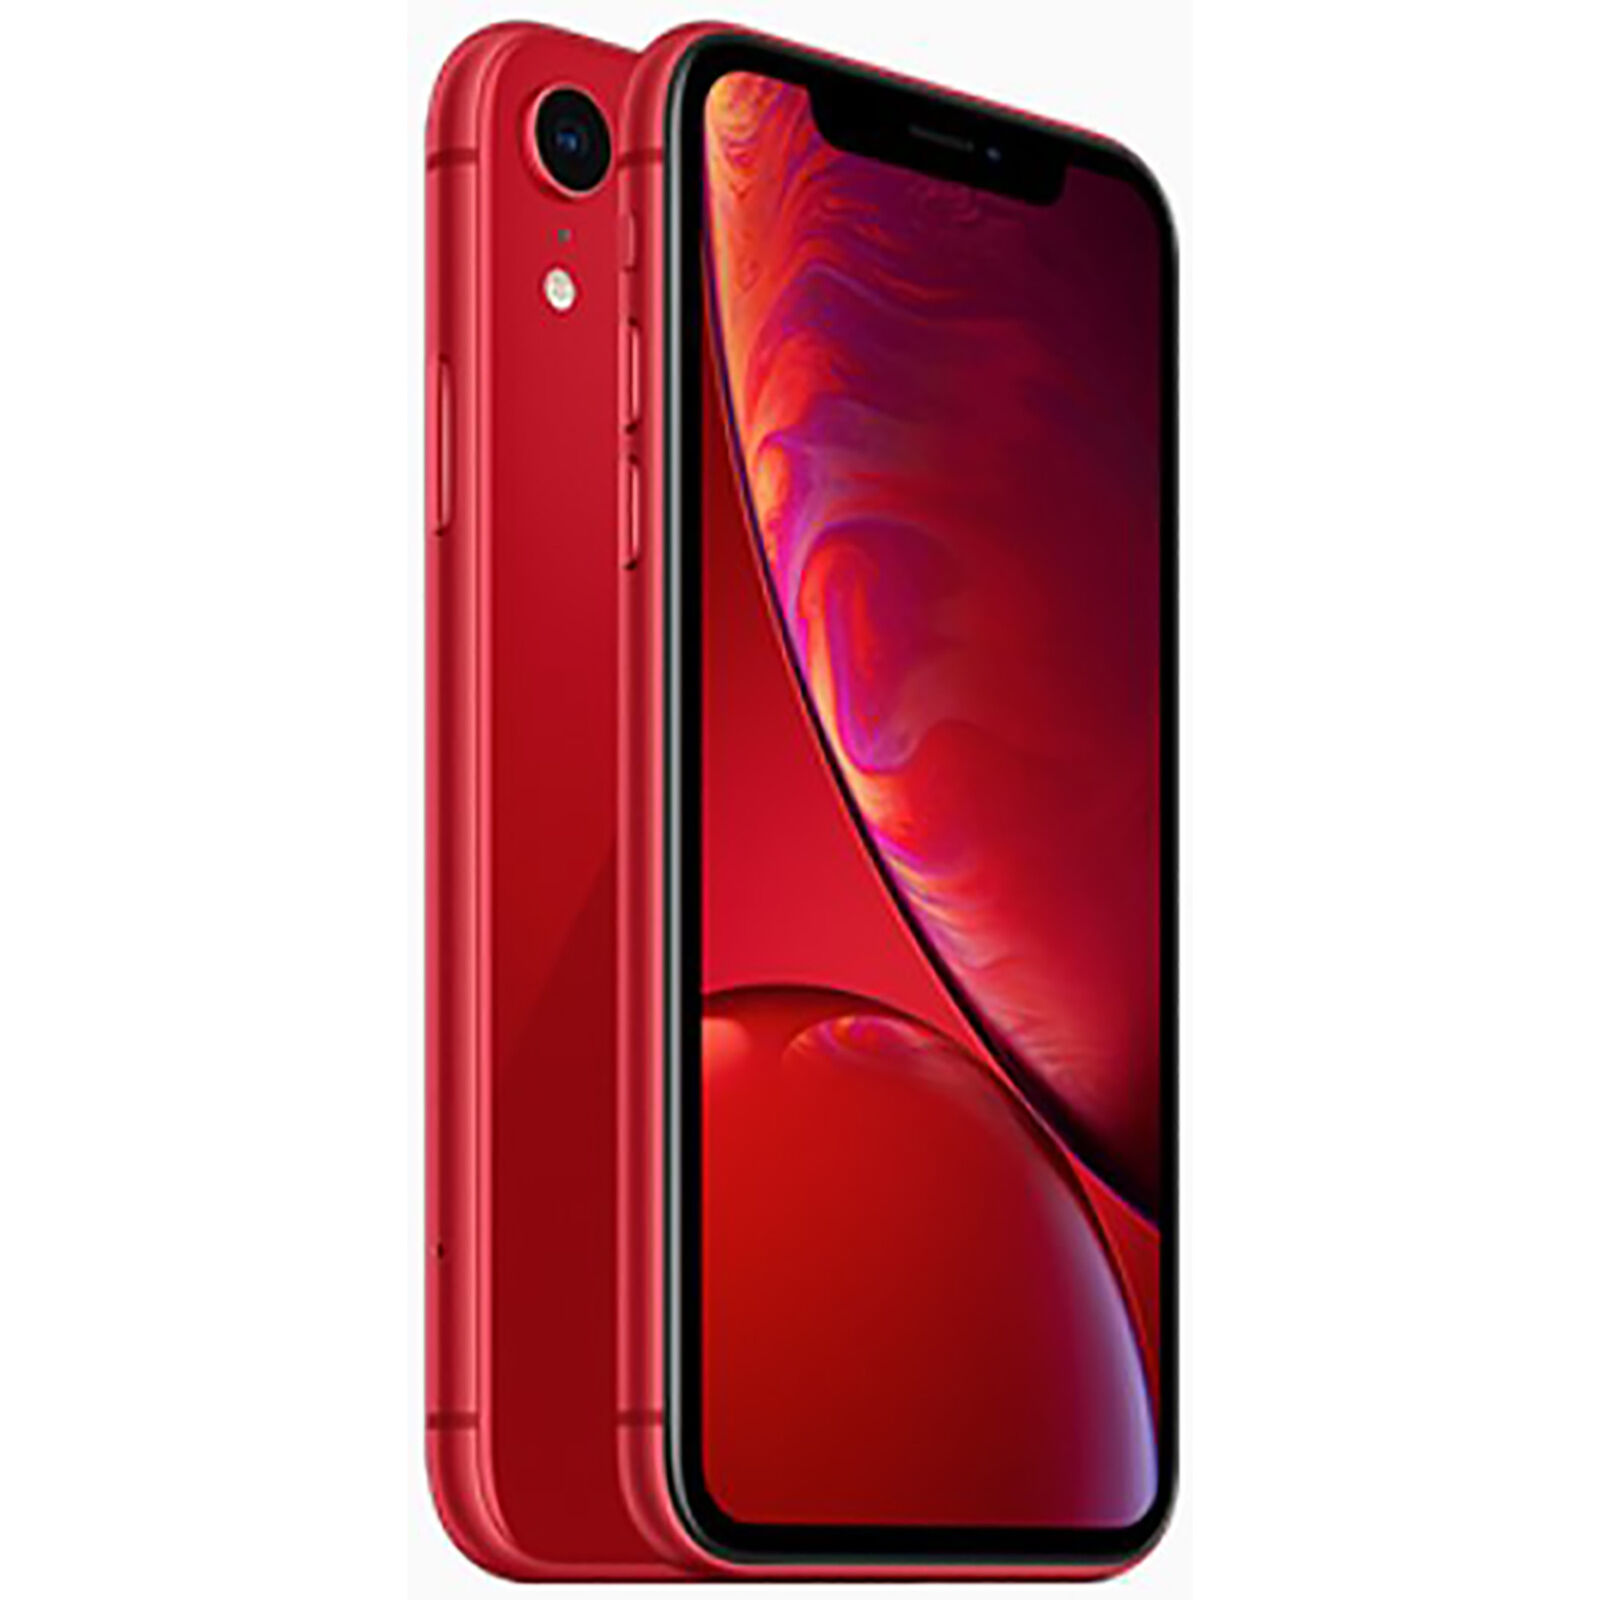 Apple iPhone XR (PRODUCT)RED - 128GB - (Sprint) A1984 (CDMA 